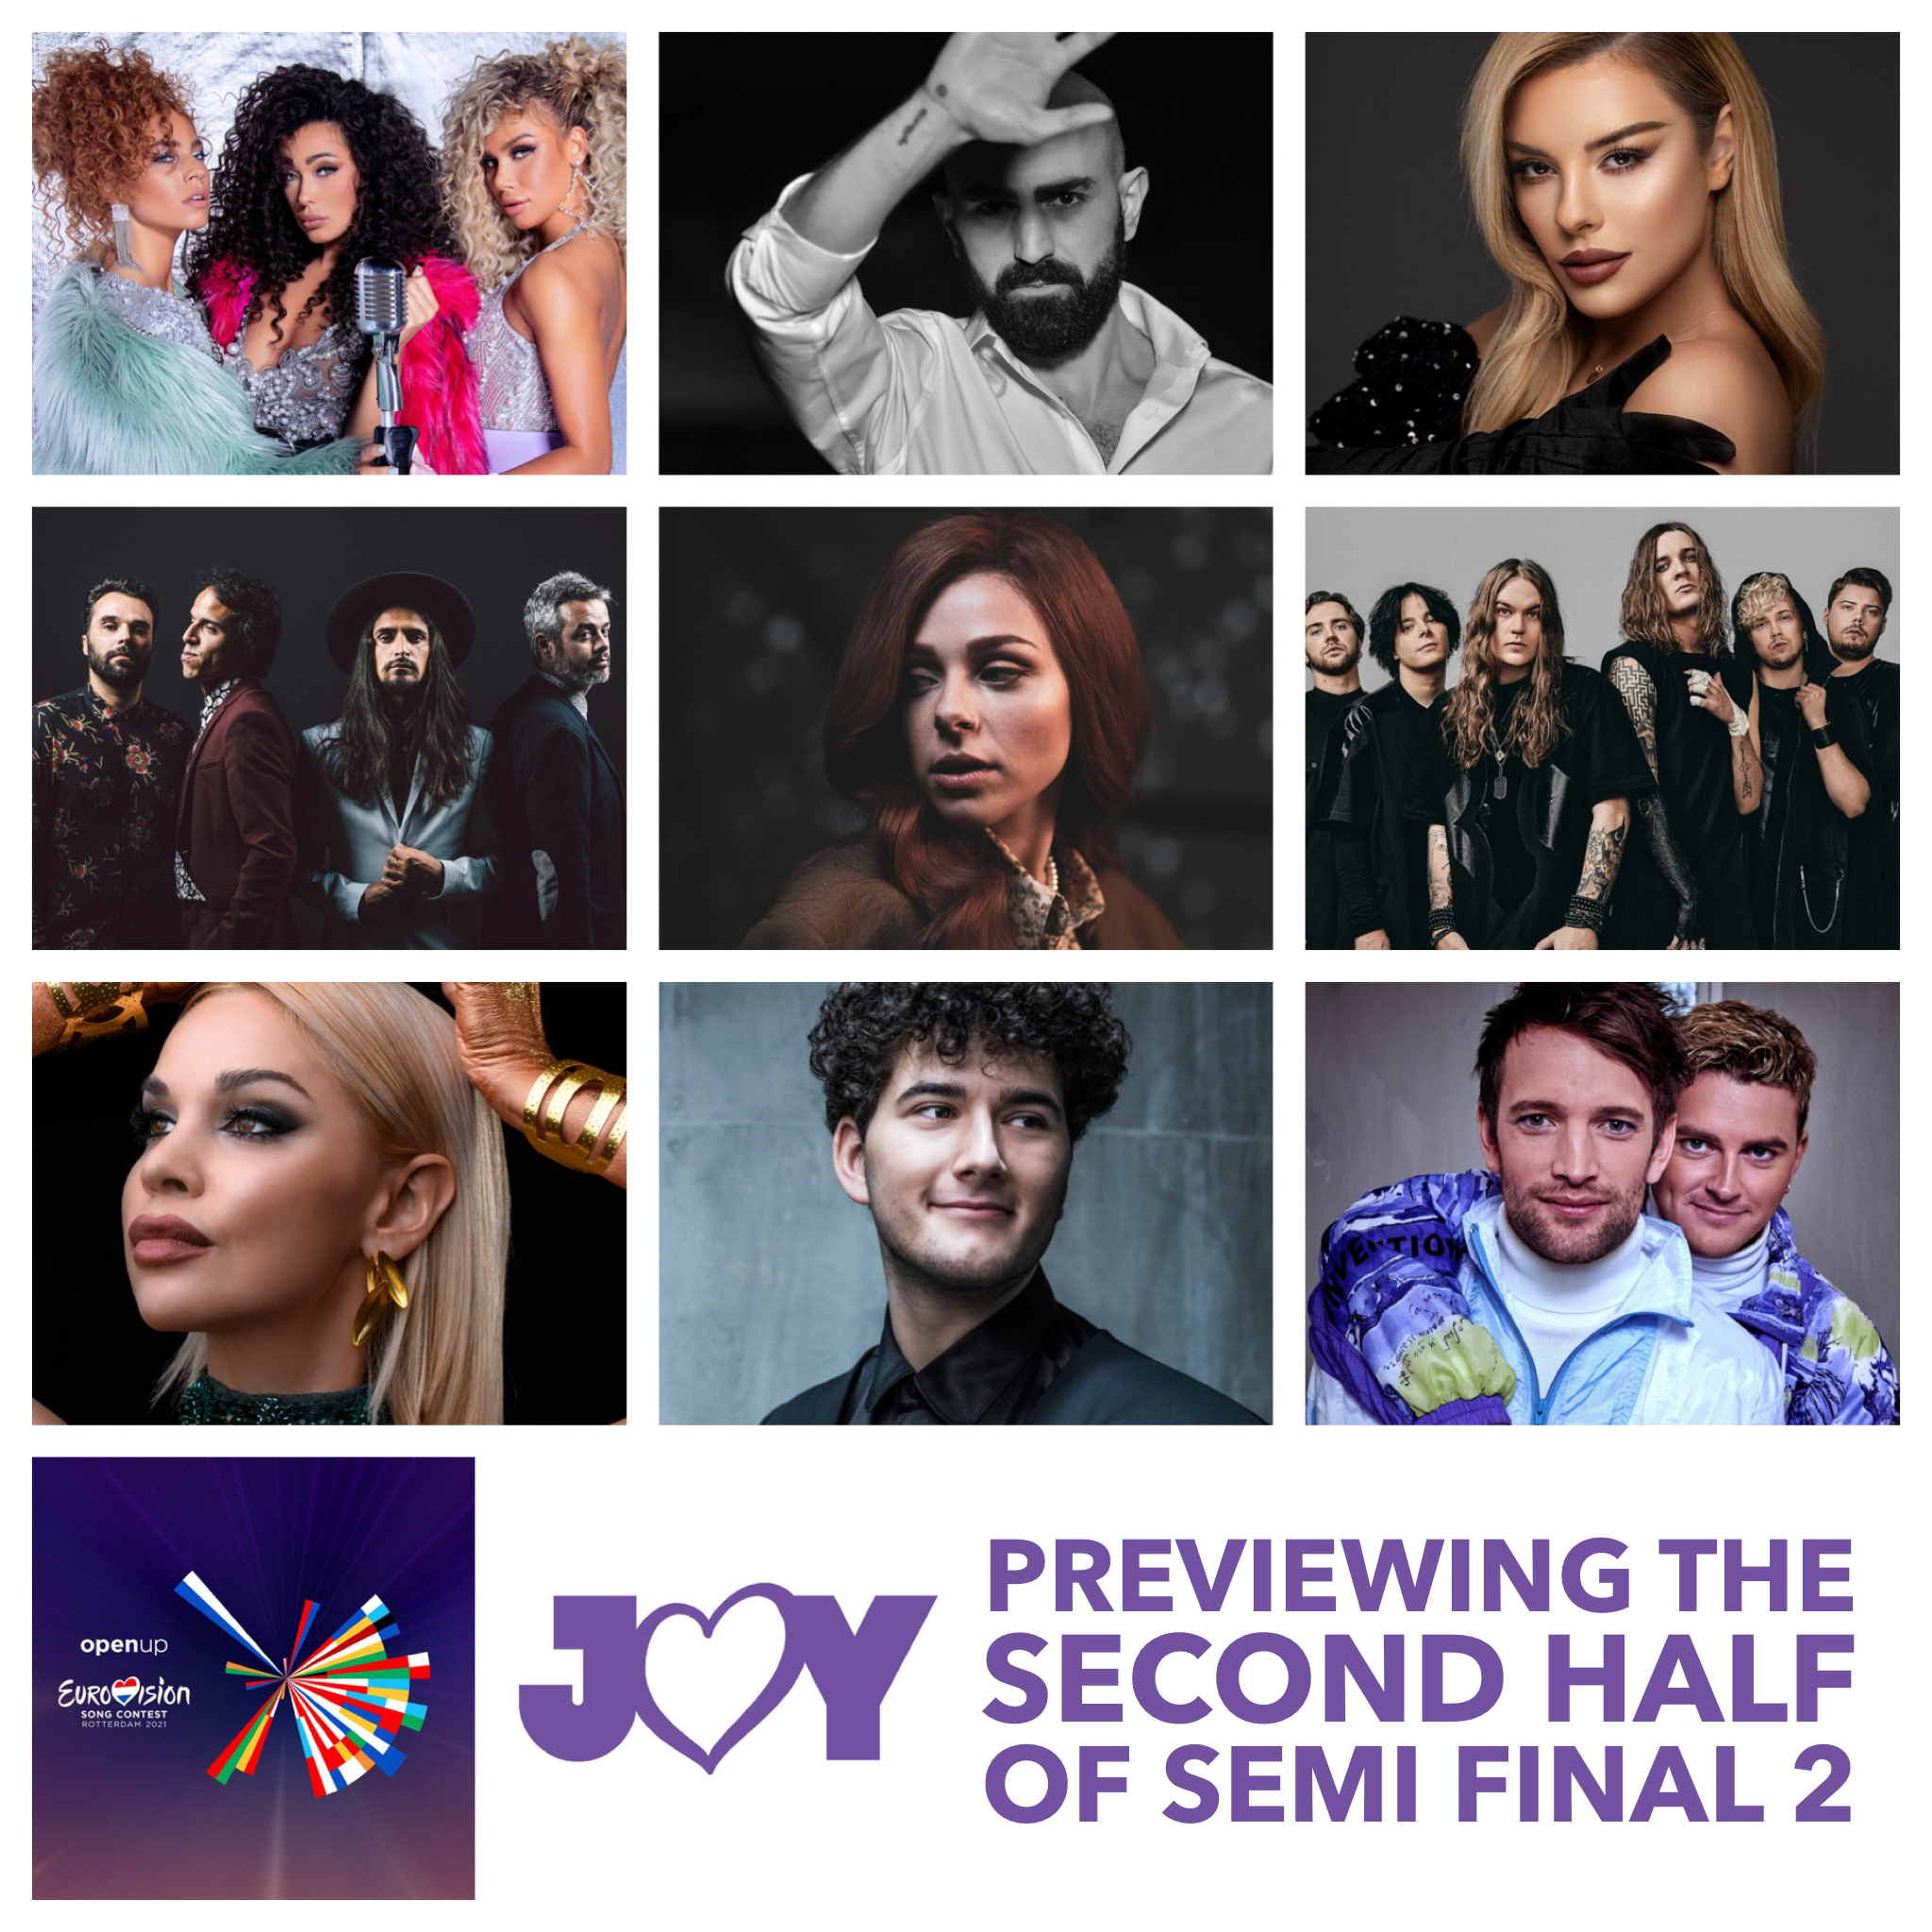 #OpenUp: Previewing the second half of Eurovision 2021 Semi Final 2